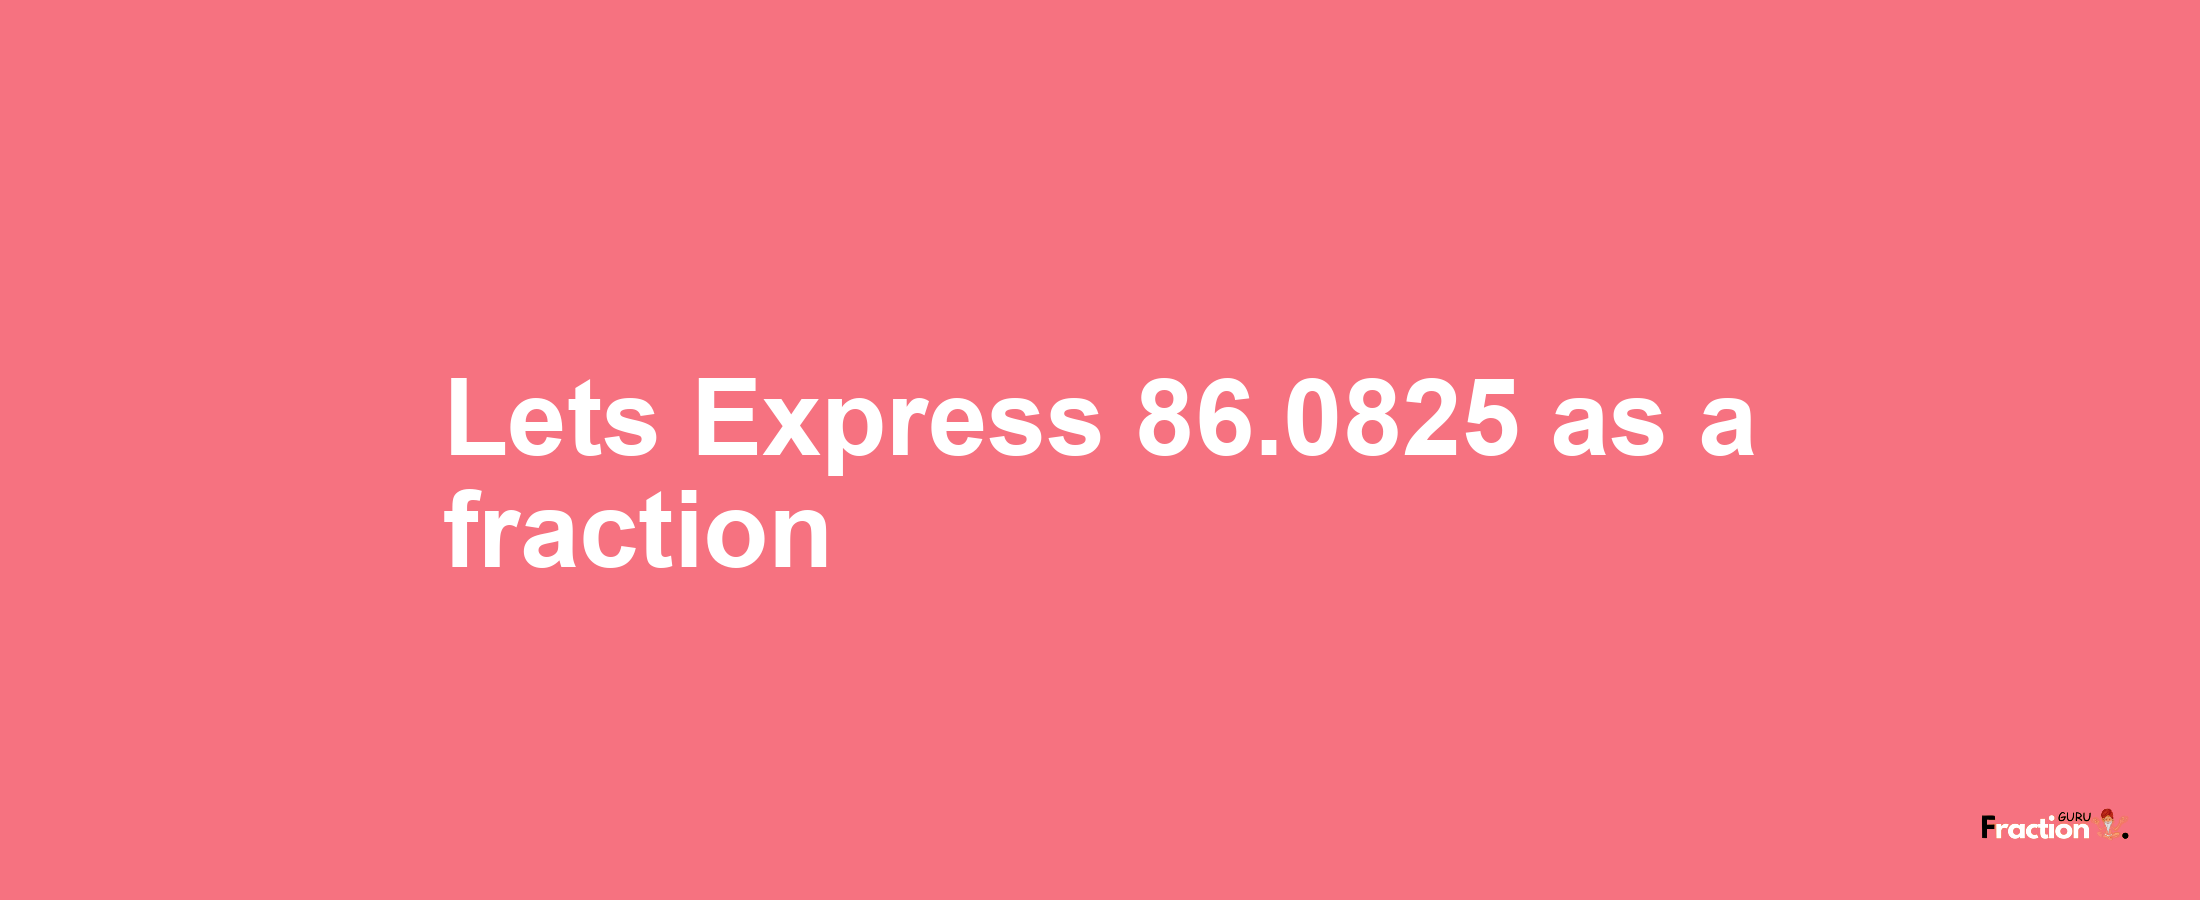 Lets Express 86.0825 as afraction